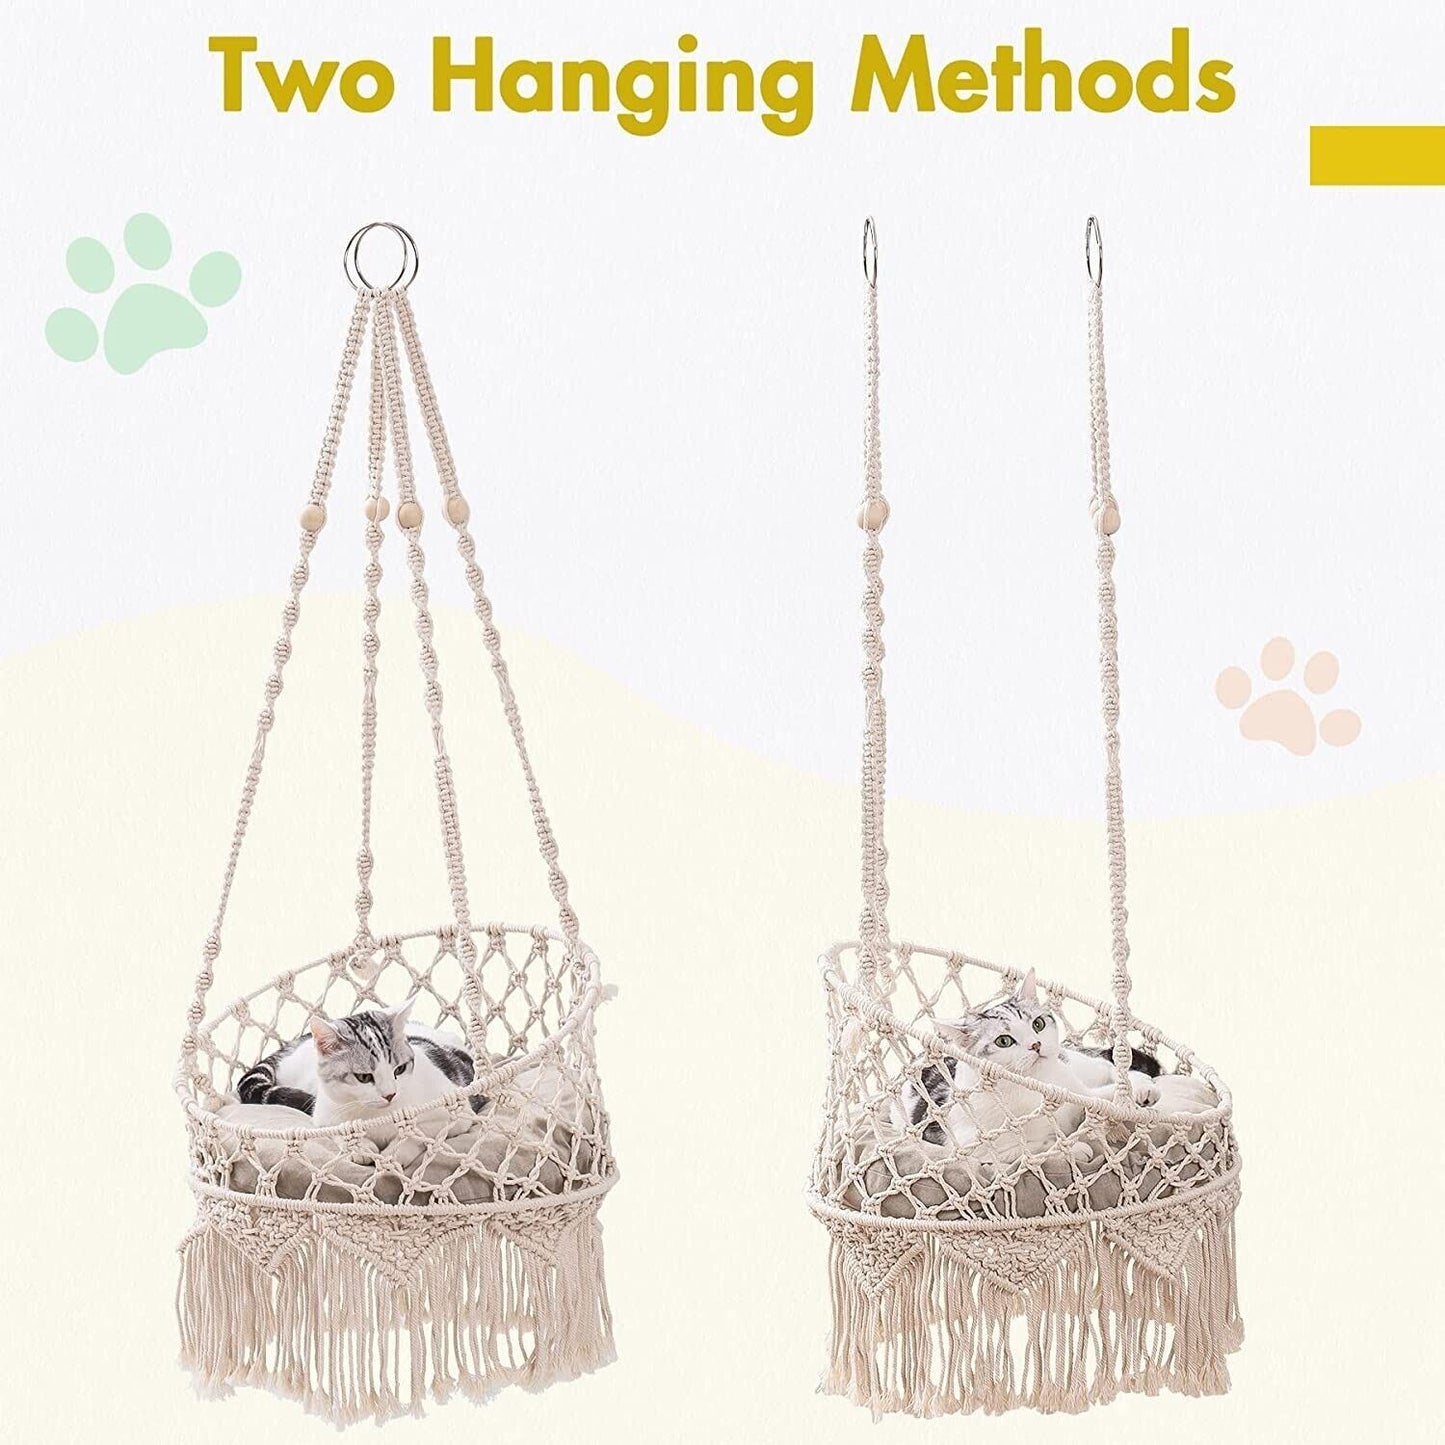 Boho Chic Hanging Macrame Bed For Cats